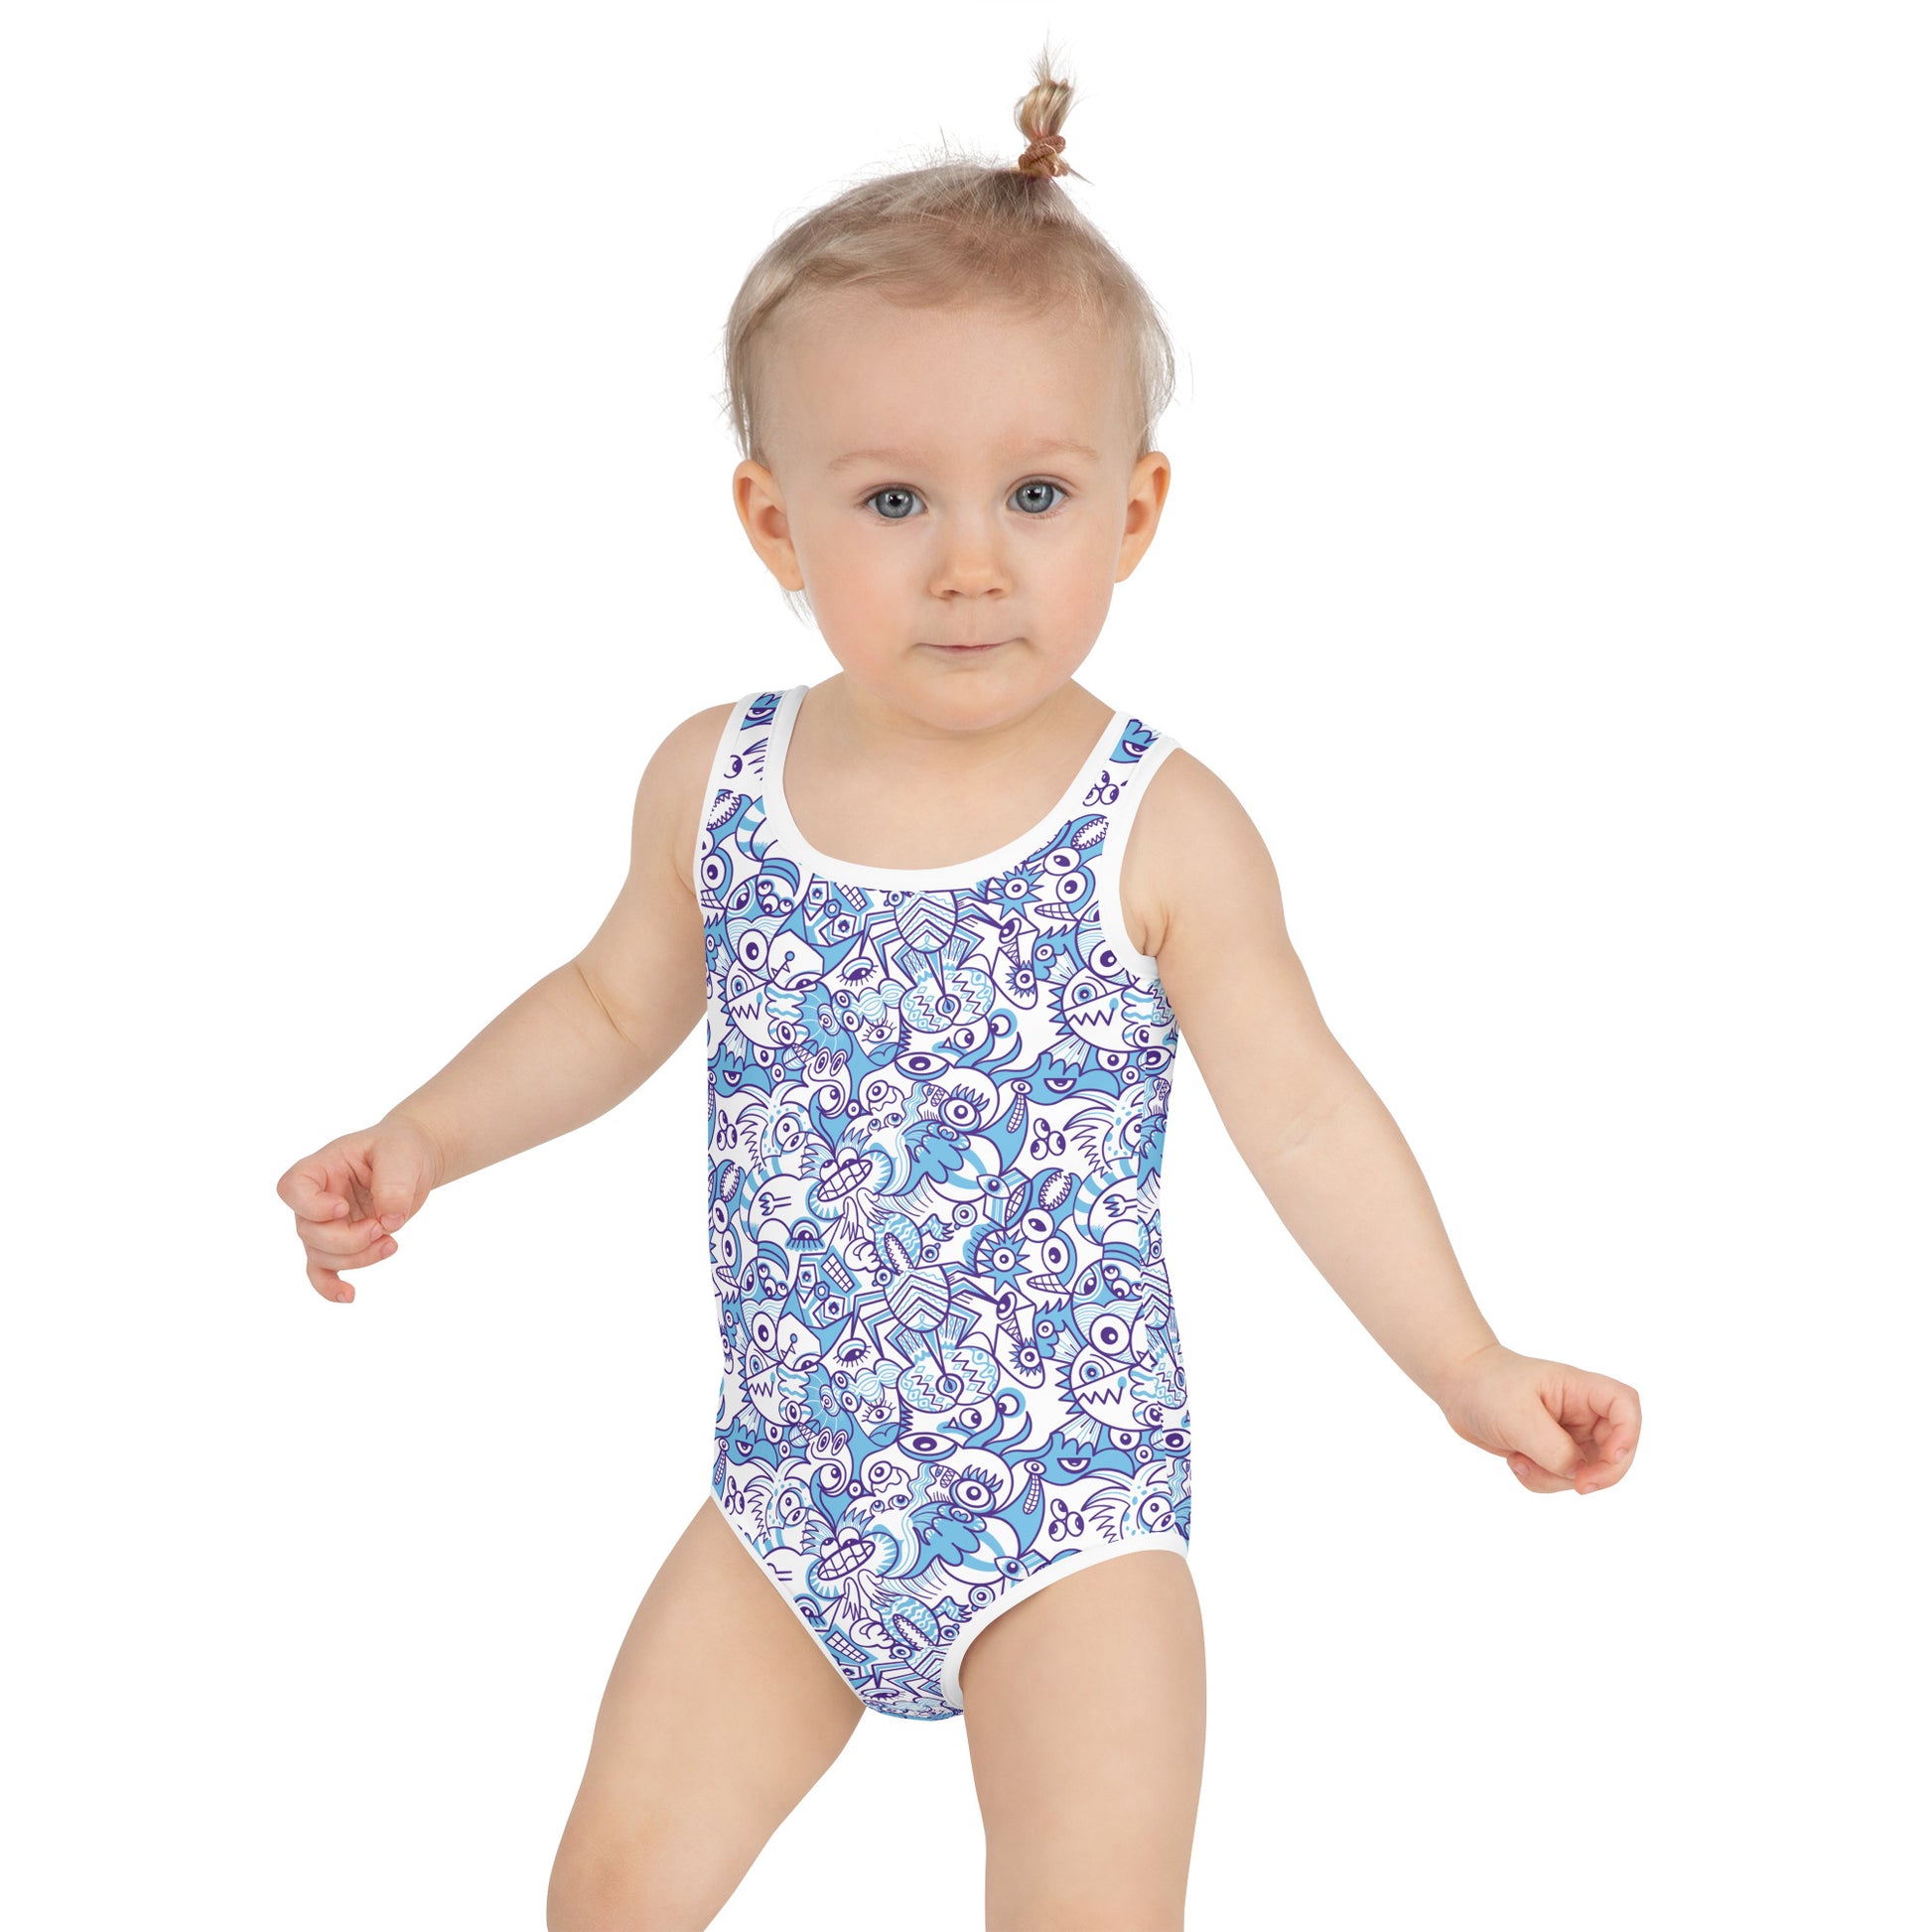 Whimsical Blue Doodle Critterscape pattern design All-Over Print Kids Swimsuit. Baby size